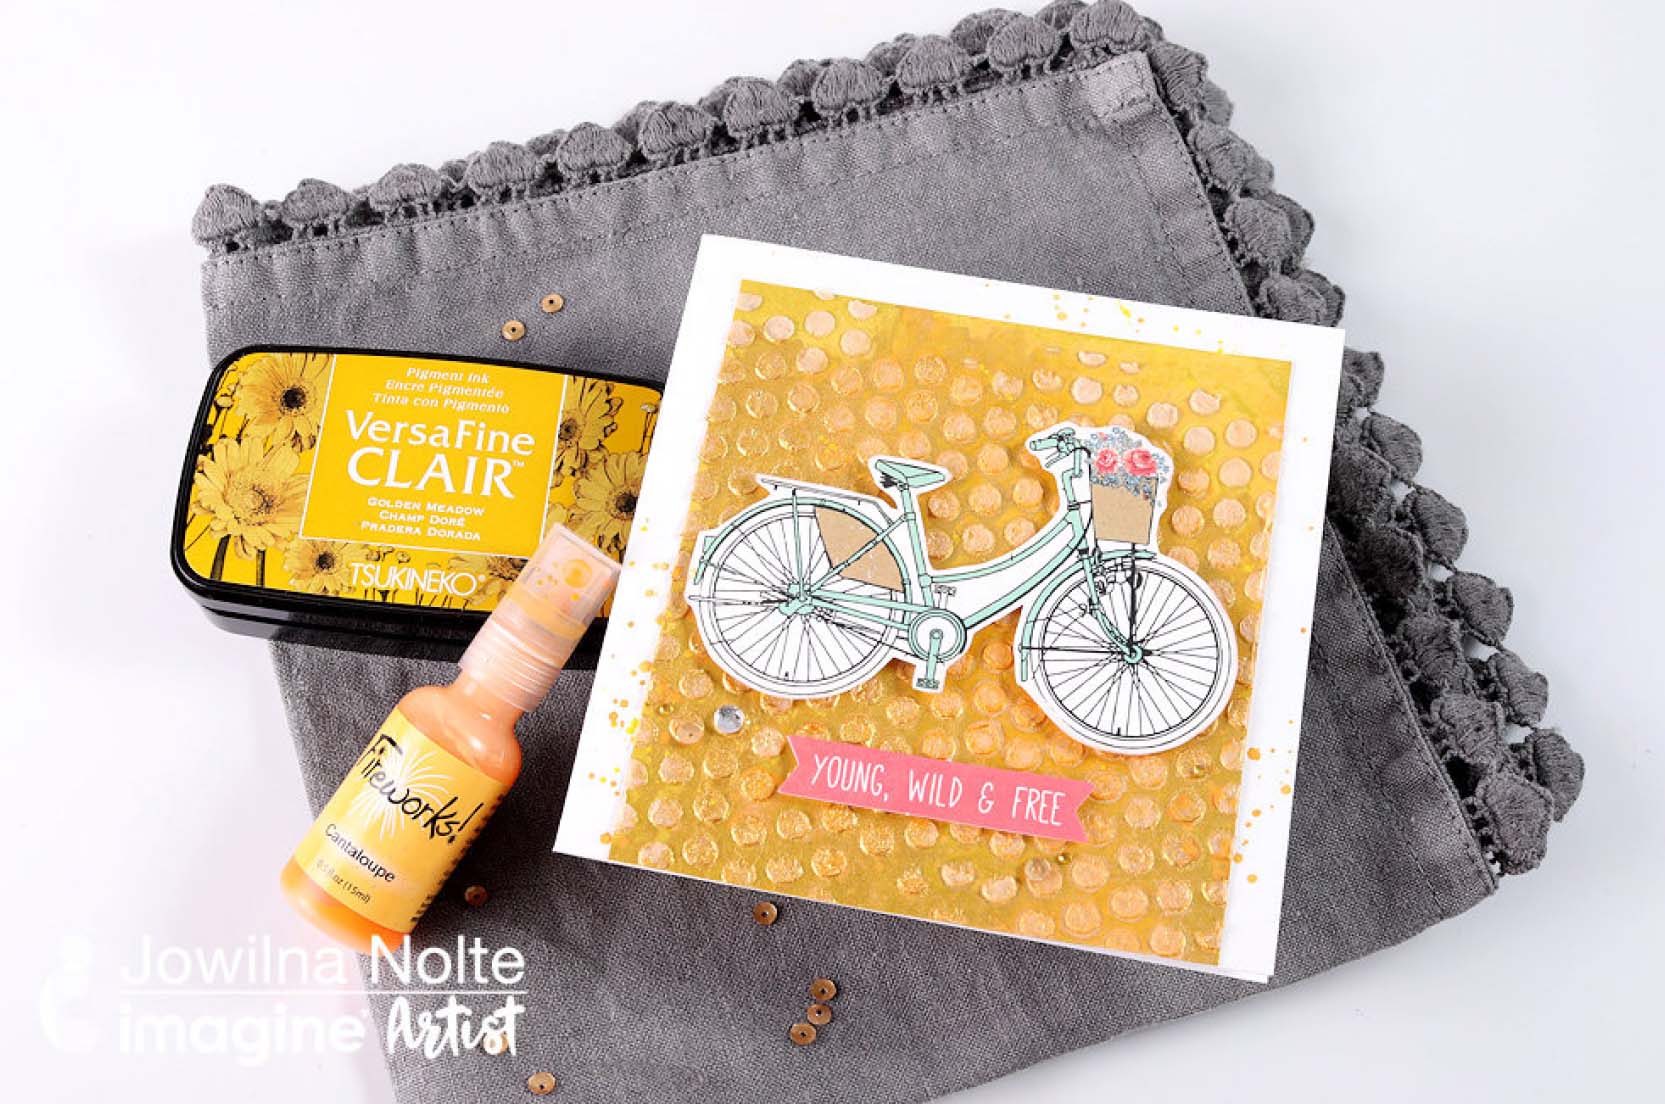 Design a “Live Wild & Free” Themed Bicycle Card